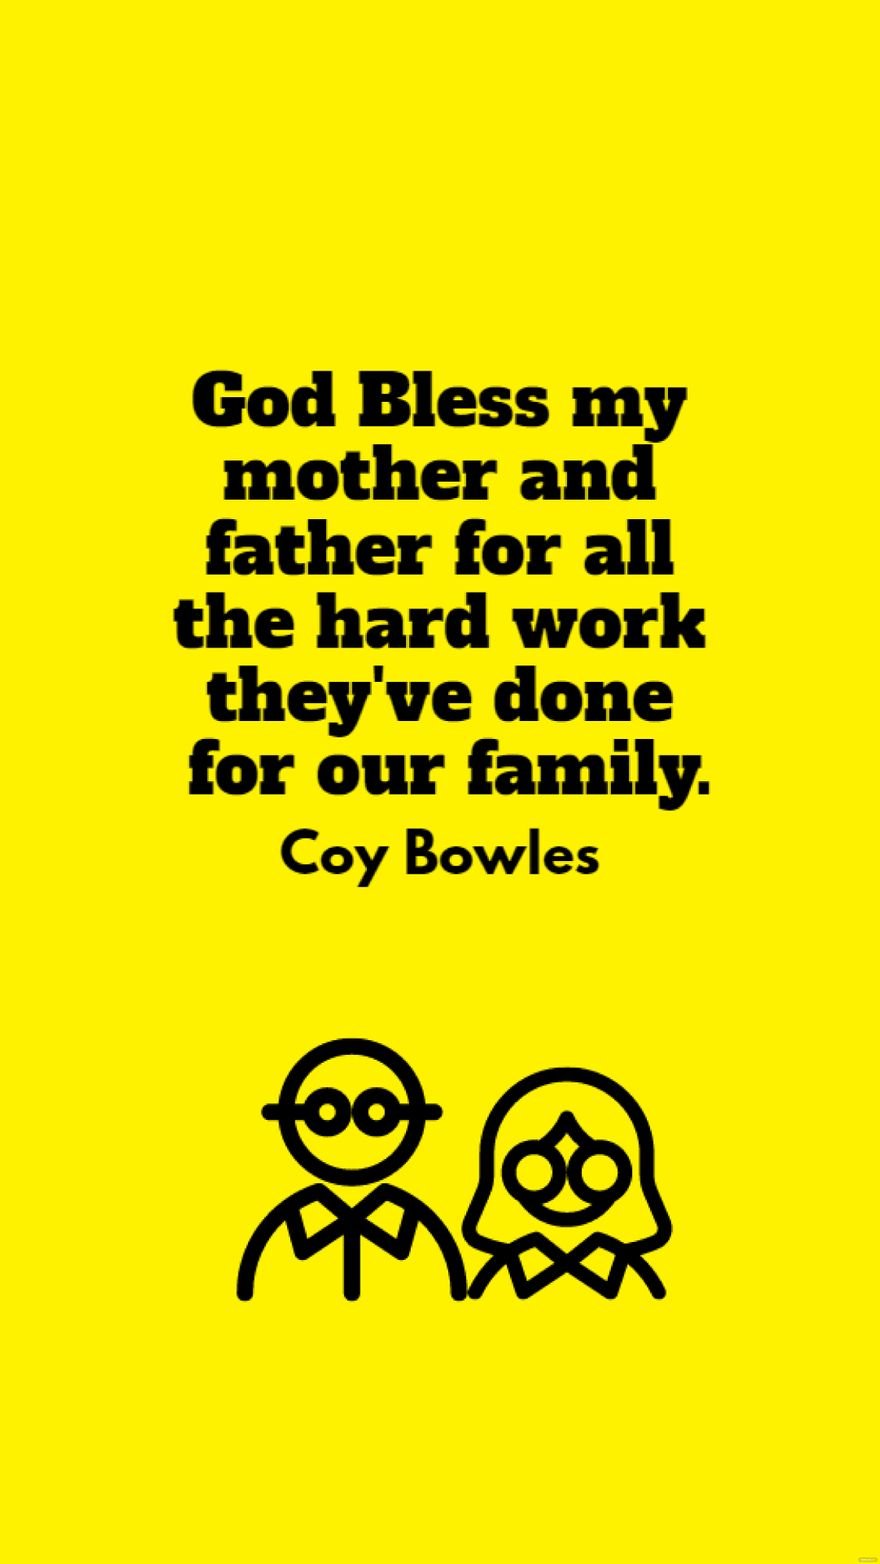 Free Coy Bowles - God Bless my mother and father for all the hard work they've done for our family. in JPG